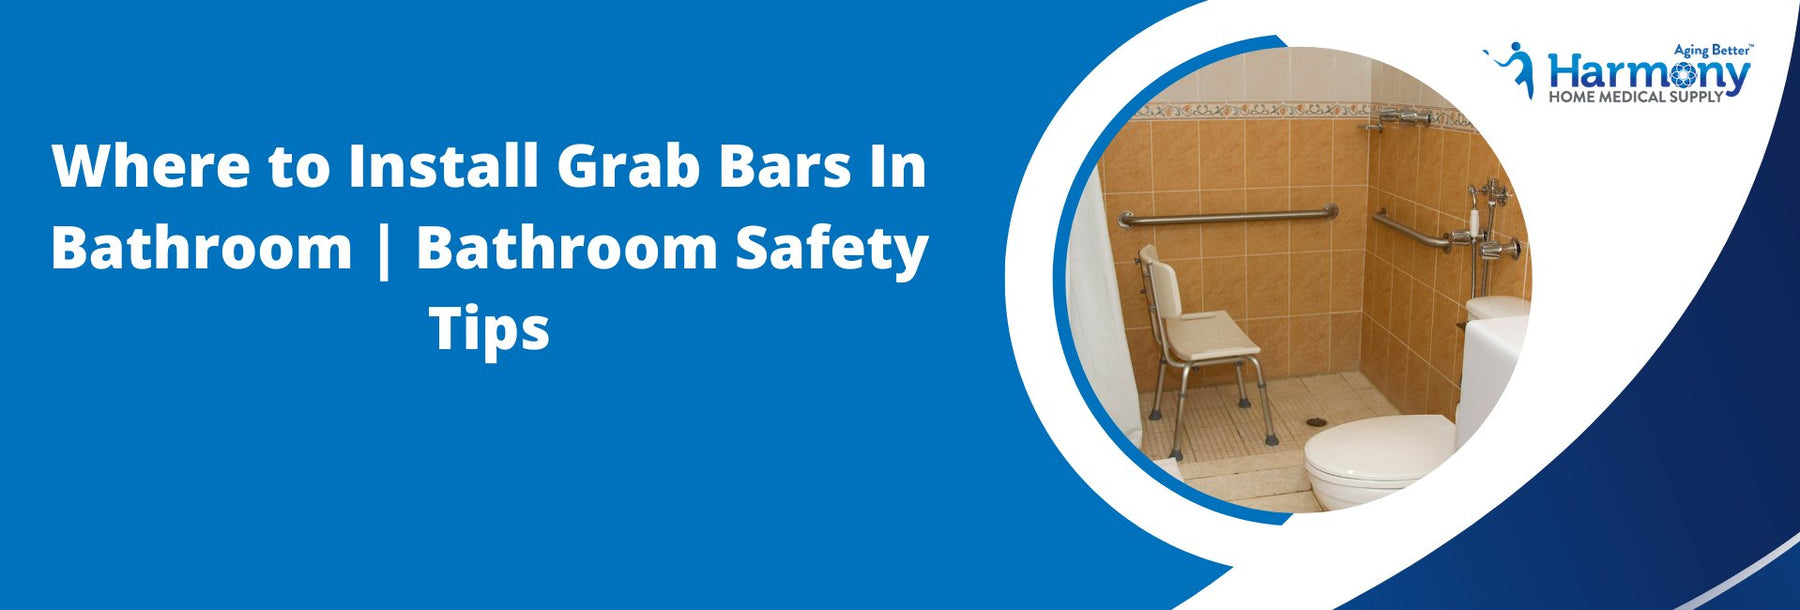 Where to Install Grab Bars In Bathroom | Bathroom Safety Tips - Harmony Home Medical Supply